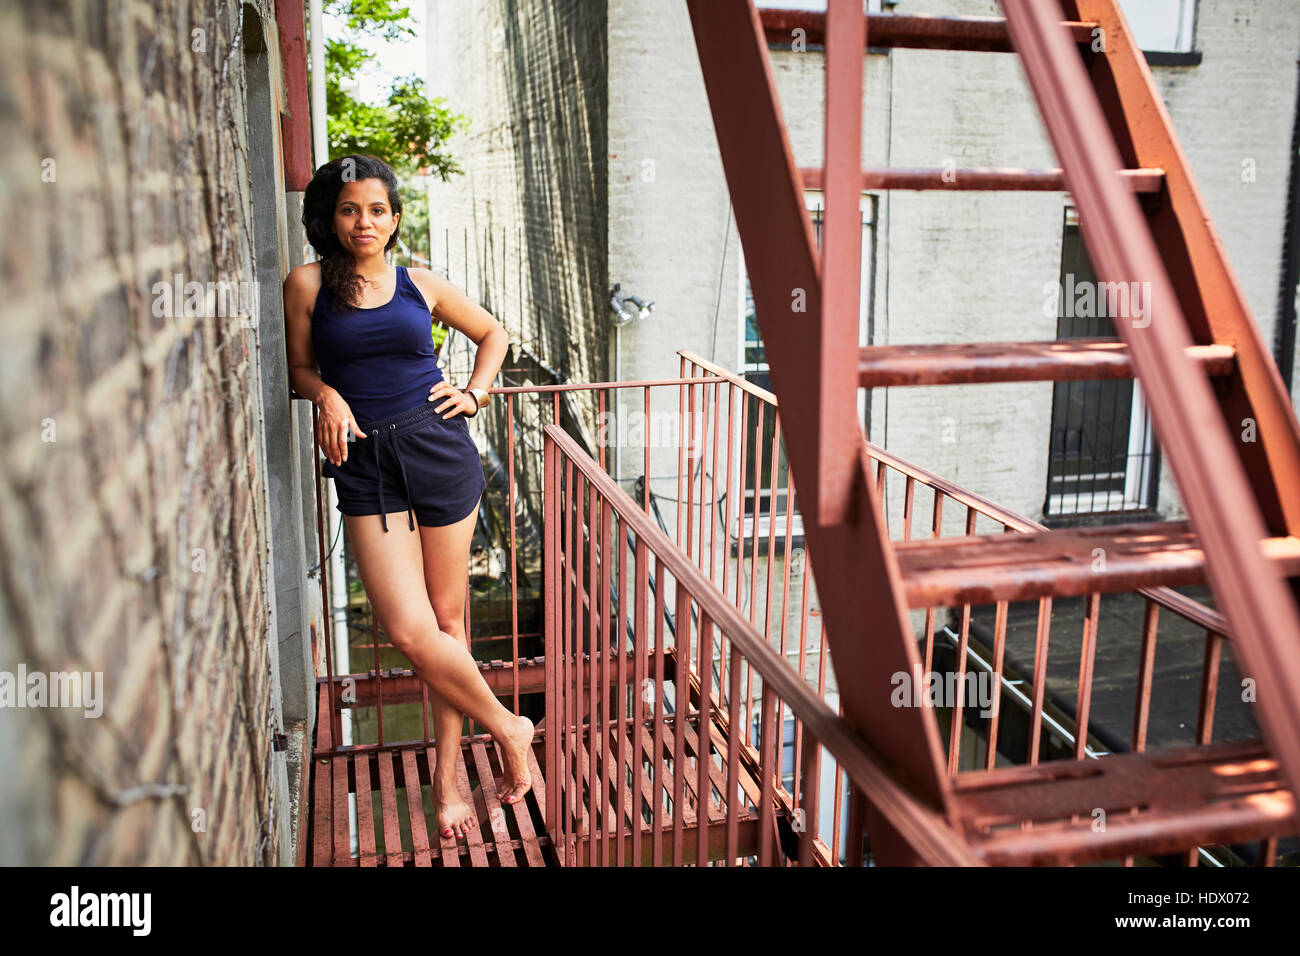 Portrait of smiling woman standing on urban fire escape Stock Photo